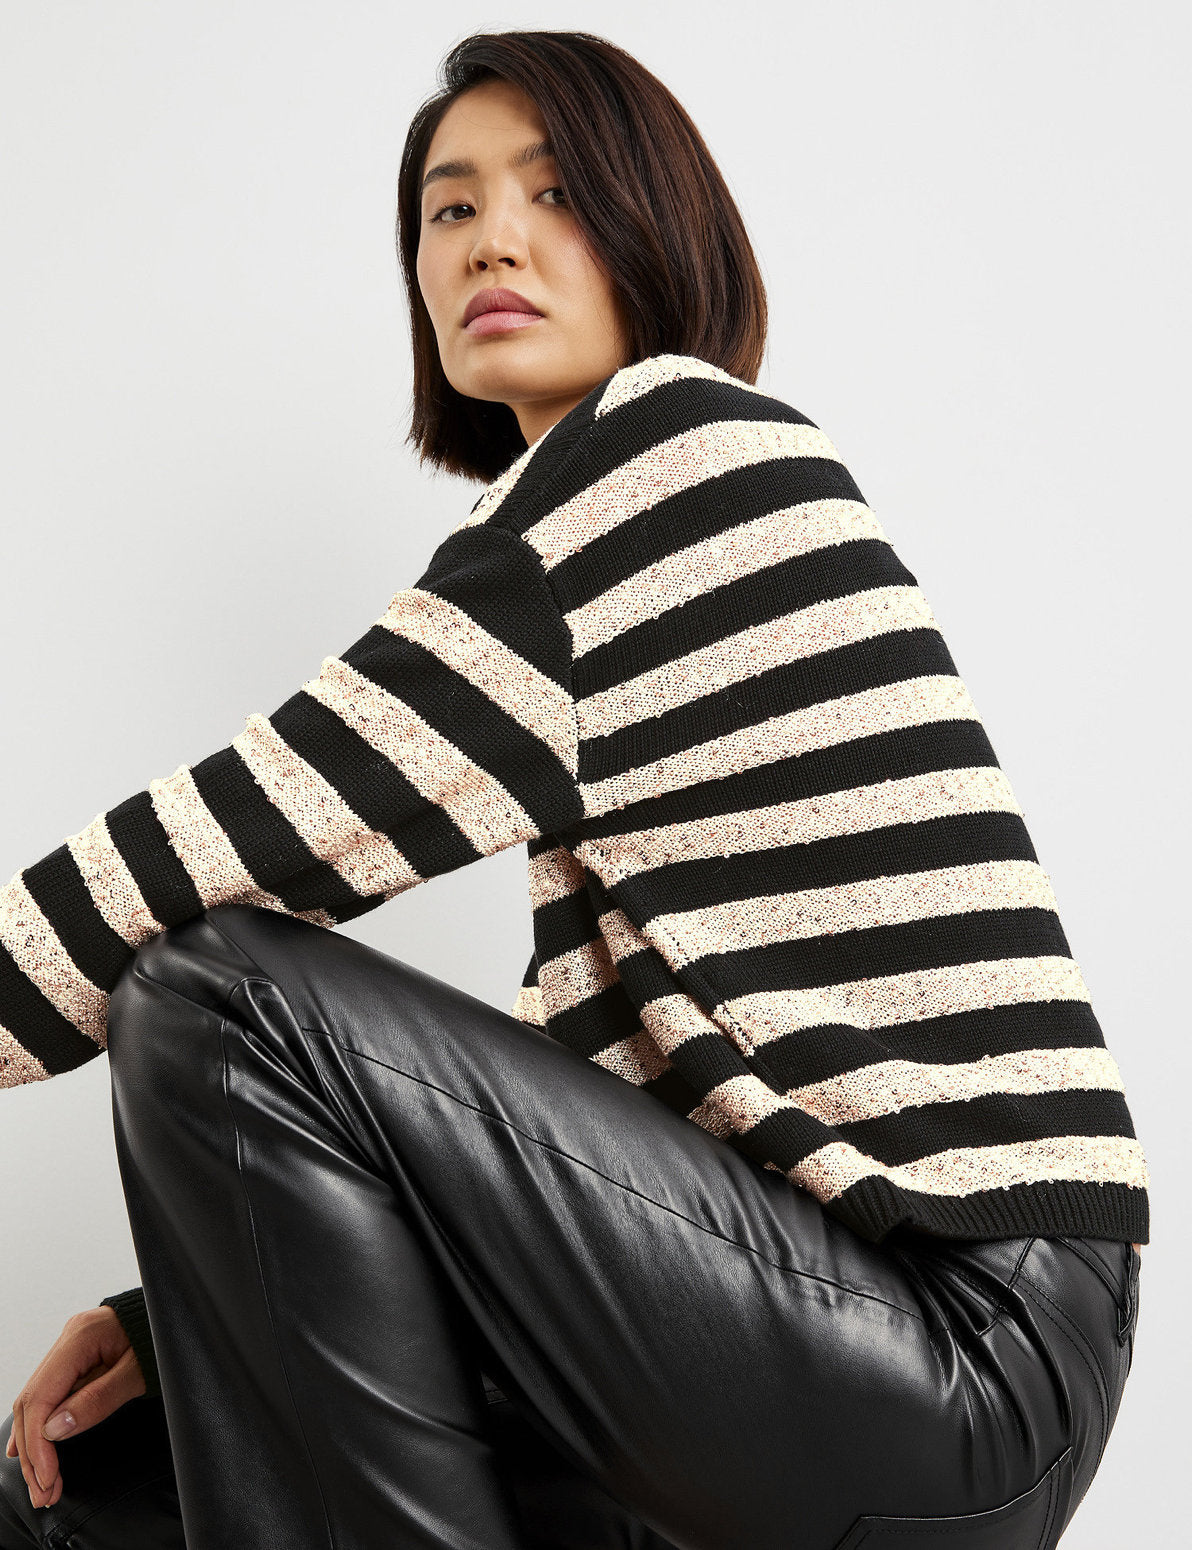 Striped Jumper With Sequin Embellishment_472414-15314_1103_05